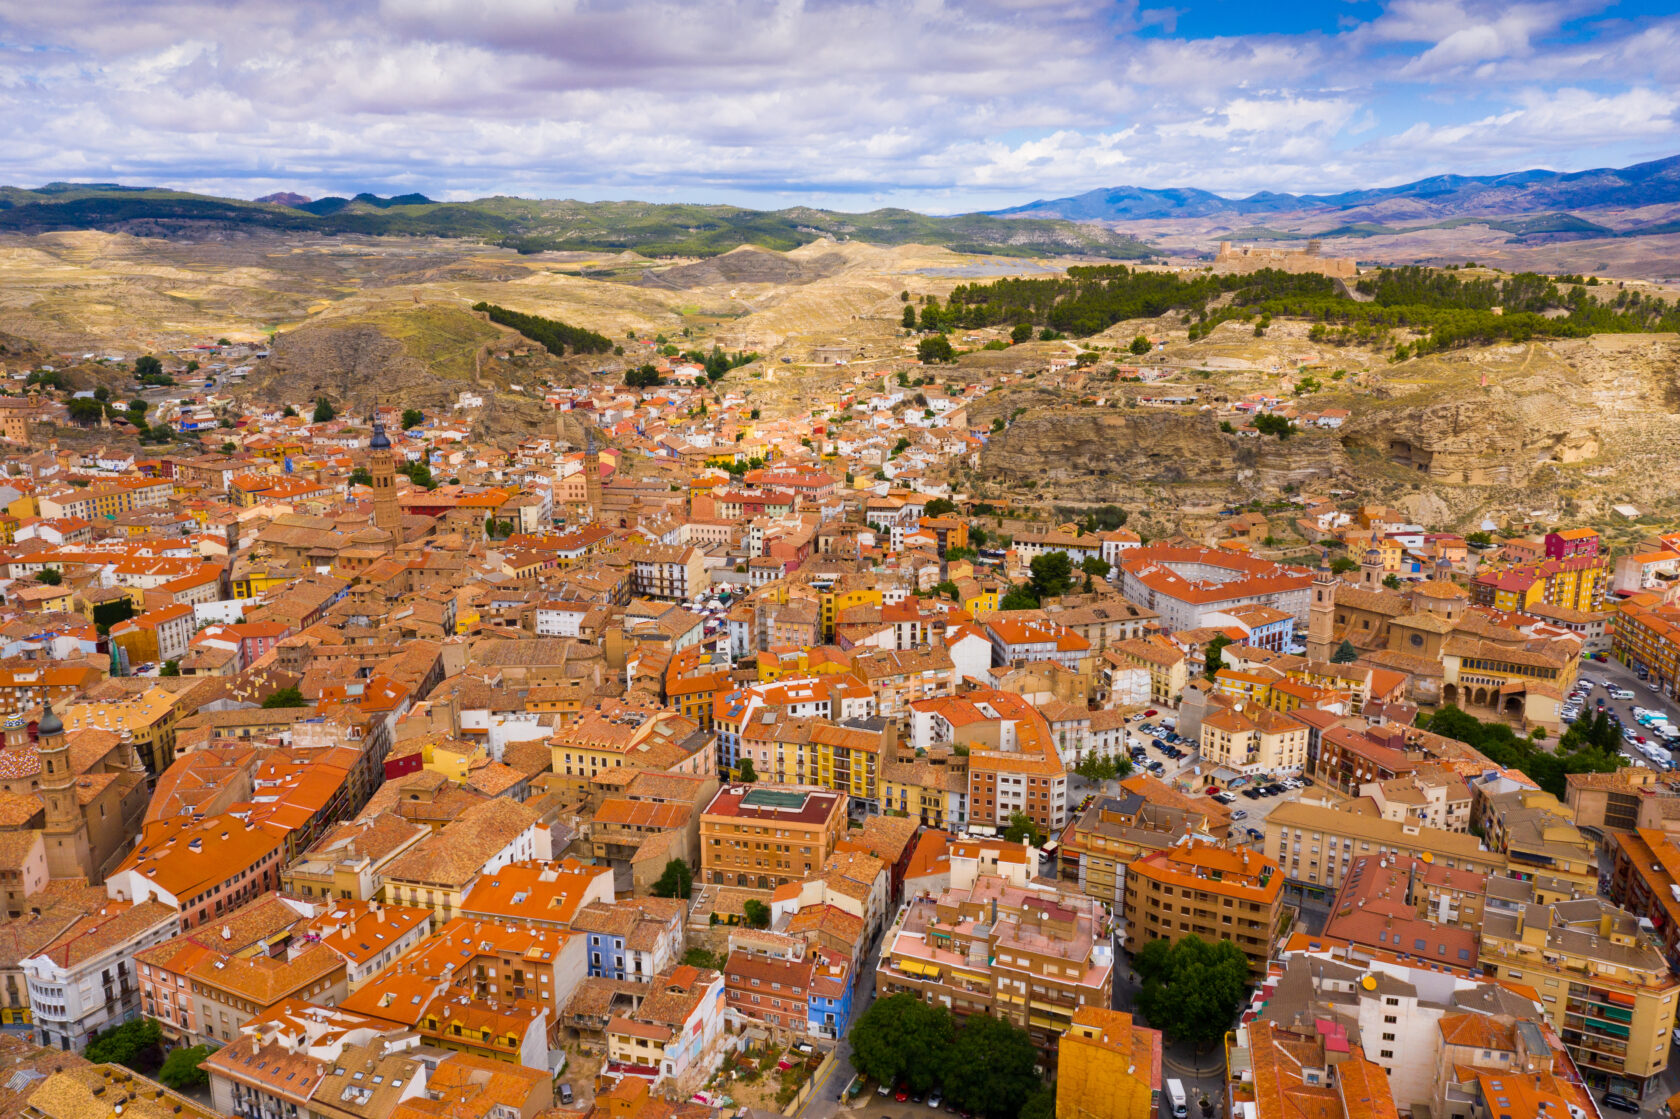 View of the rooftops of the Spanish town of Calatayud (an Atlantis site).